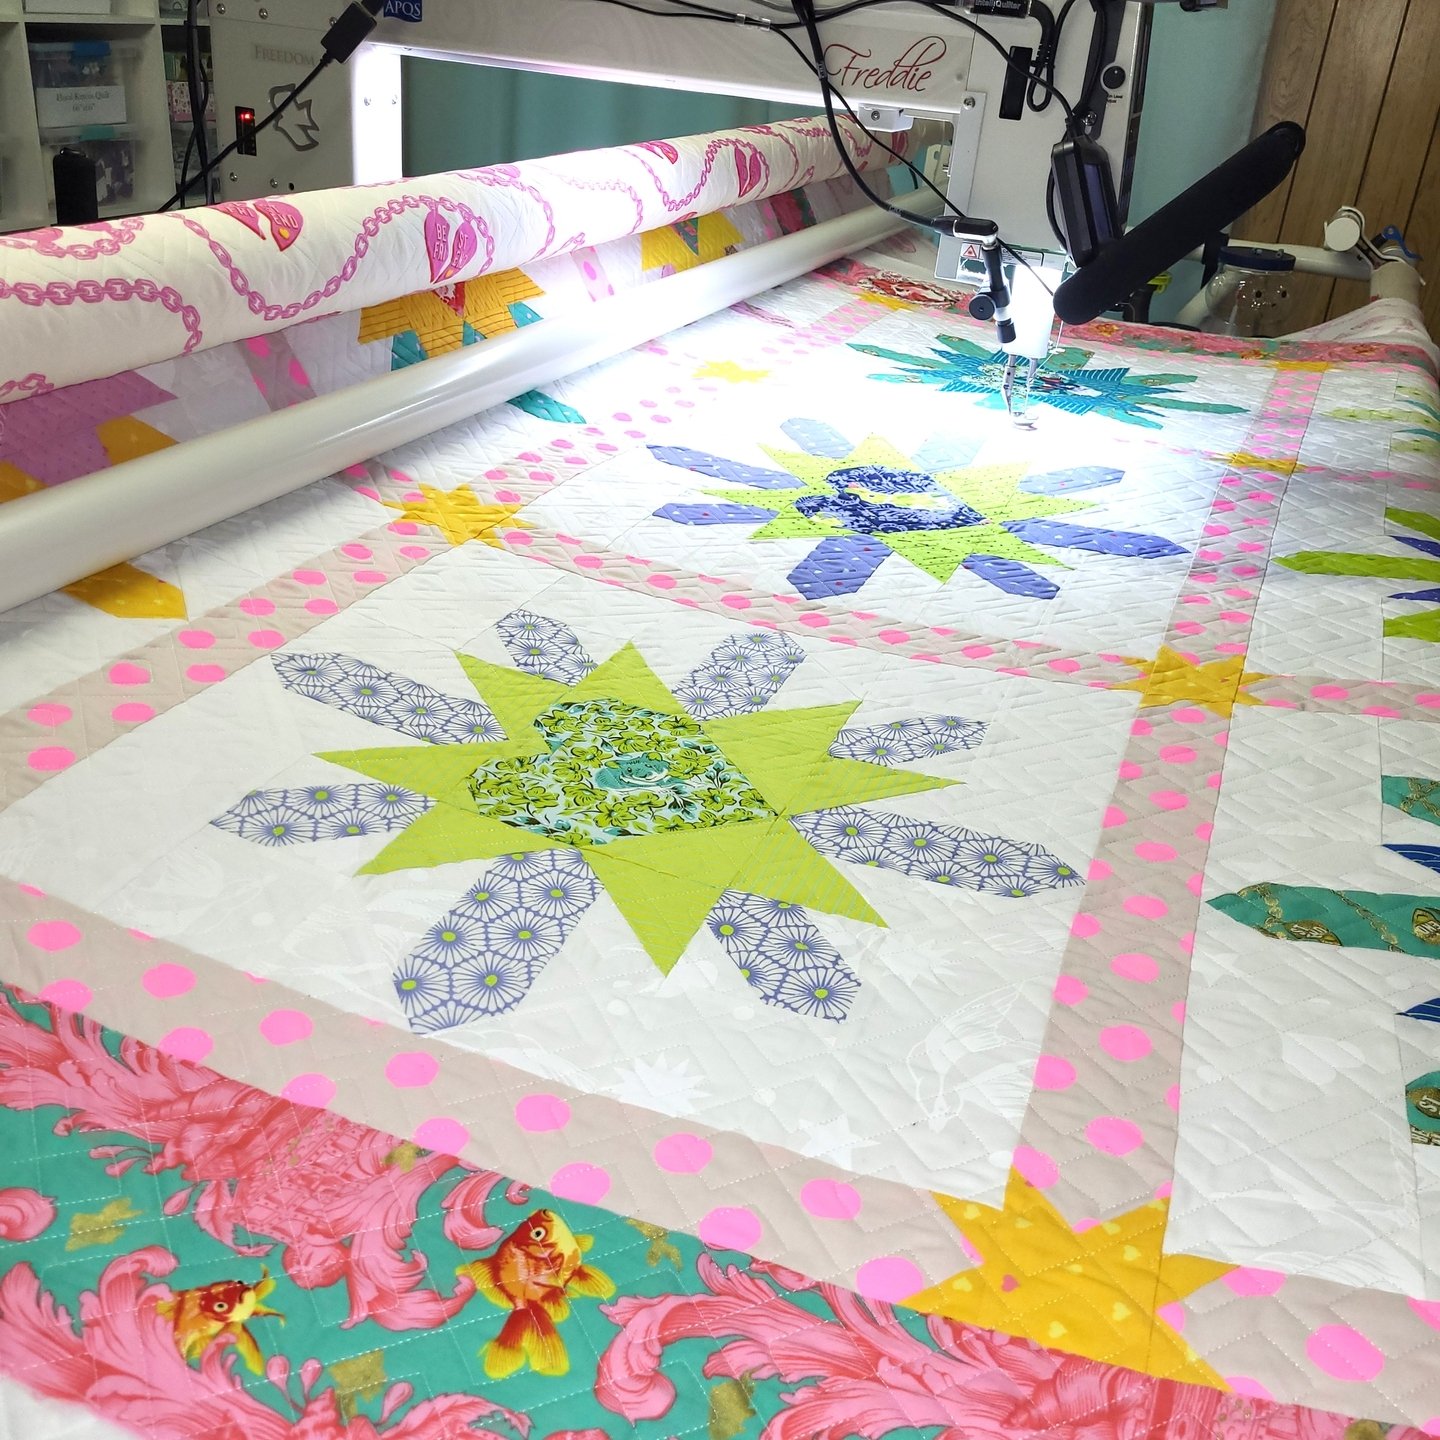 It's Freddie Friday!! 🎉🎉

It feels like it's been awhile since I've featured a true Freddie Friday, but this one is the perfect way to jump back in!

Lisa pieced this gorgeous quilt and it just glows!! There are some neon inks and some metallic thr